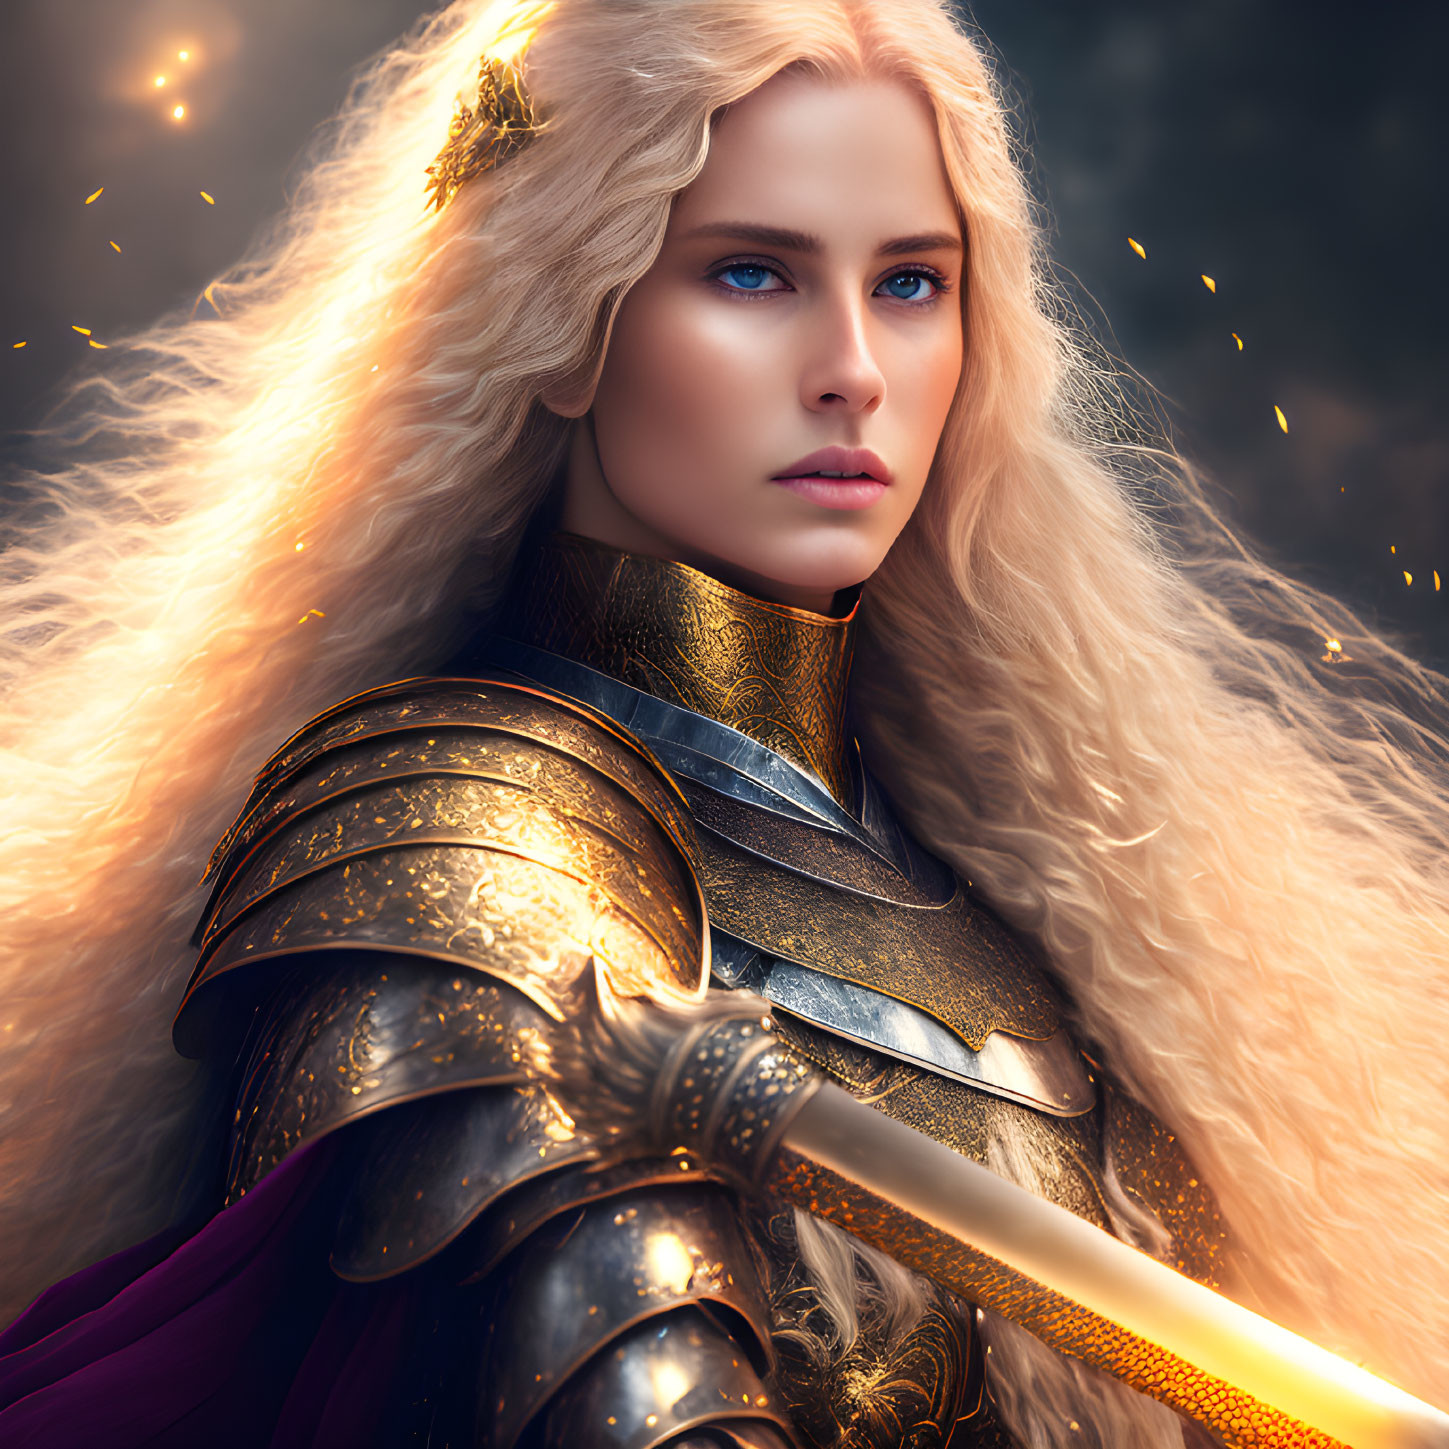 Blonde woman in golden medieval armor with sword in fiery setting